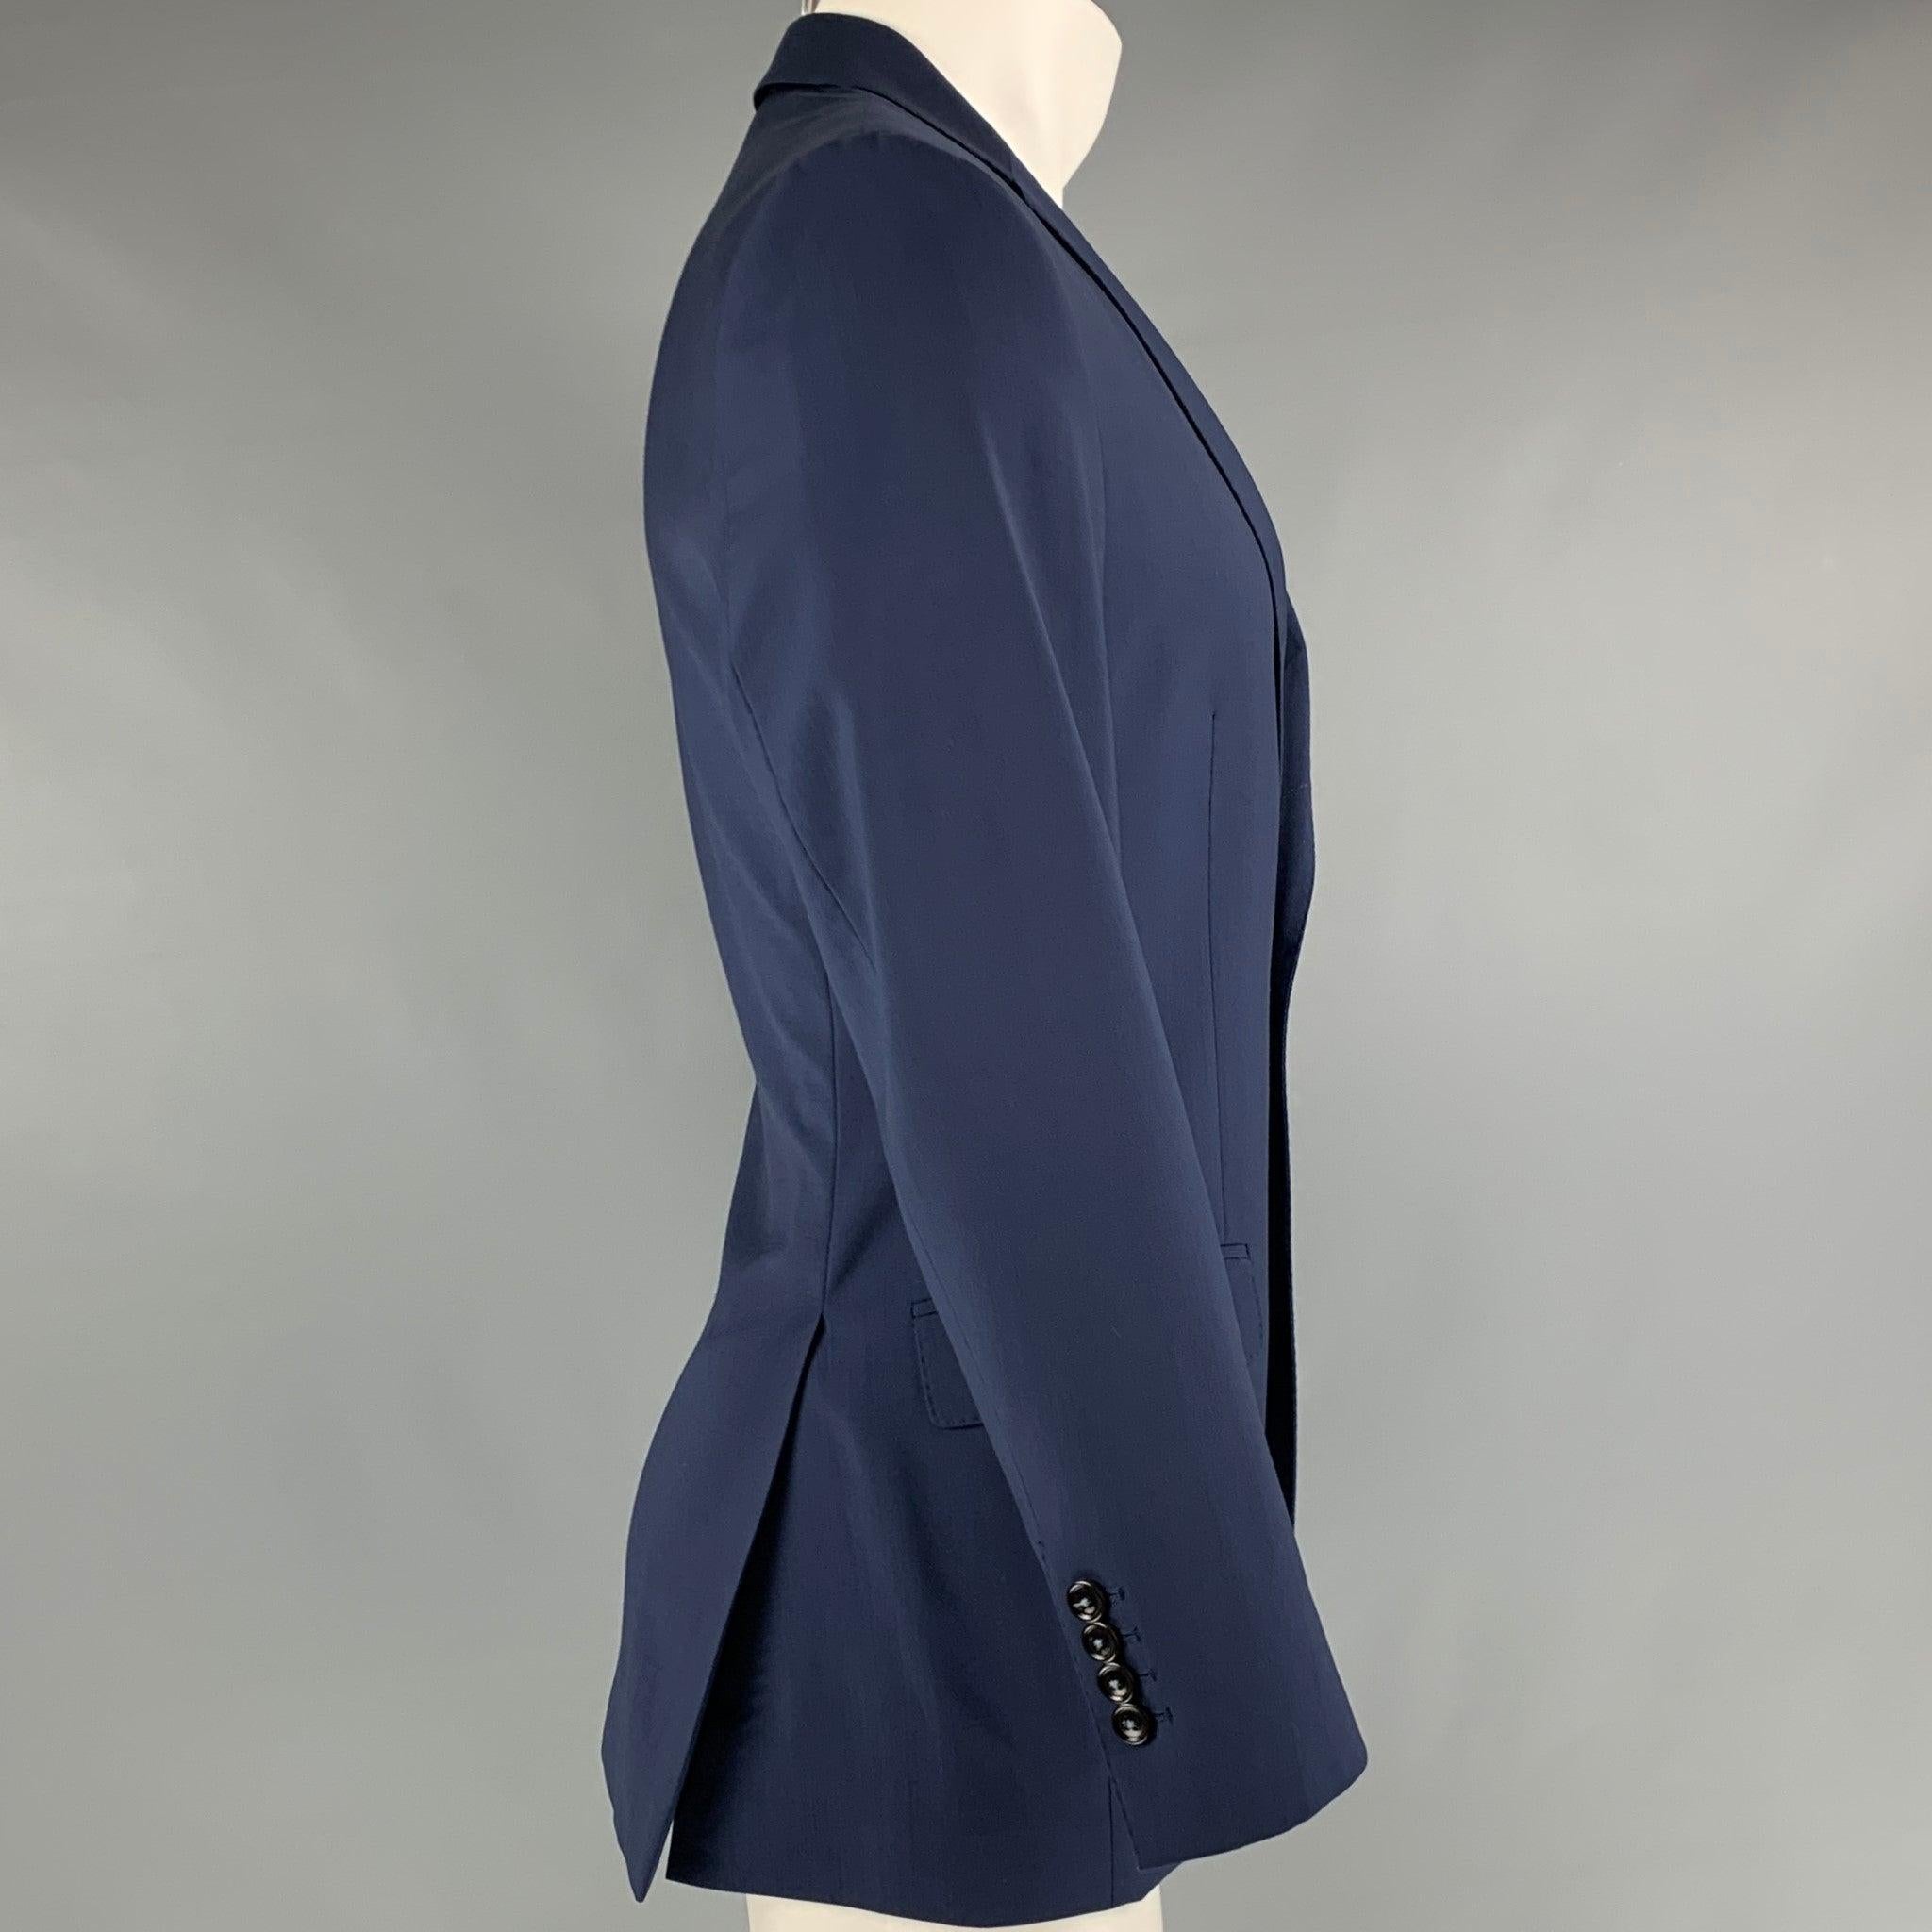 CAROLINA HERRERA
sport coat in a navy virgin wool featuring a notch lapel, flap pockets, double back vent, and a double button closure. Made in Italy. Very Good Pre-Owned Condition. Minor mark on lapel. 

Marked:   38 R 

Measurements: 
 
Shoulder: